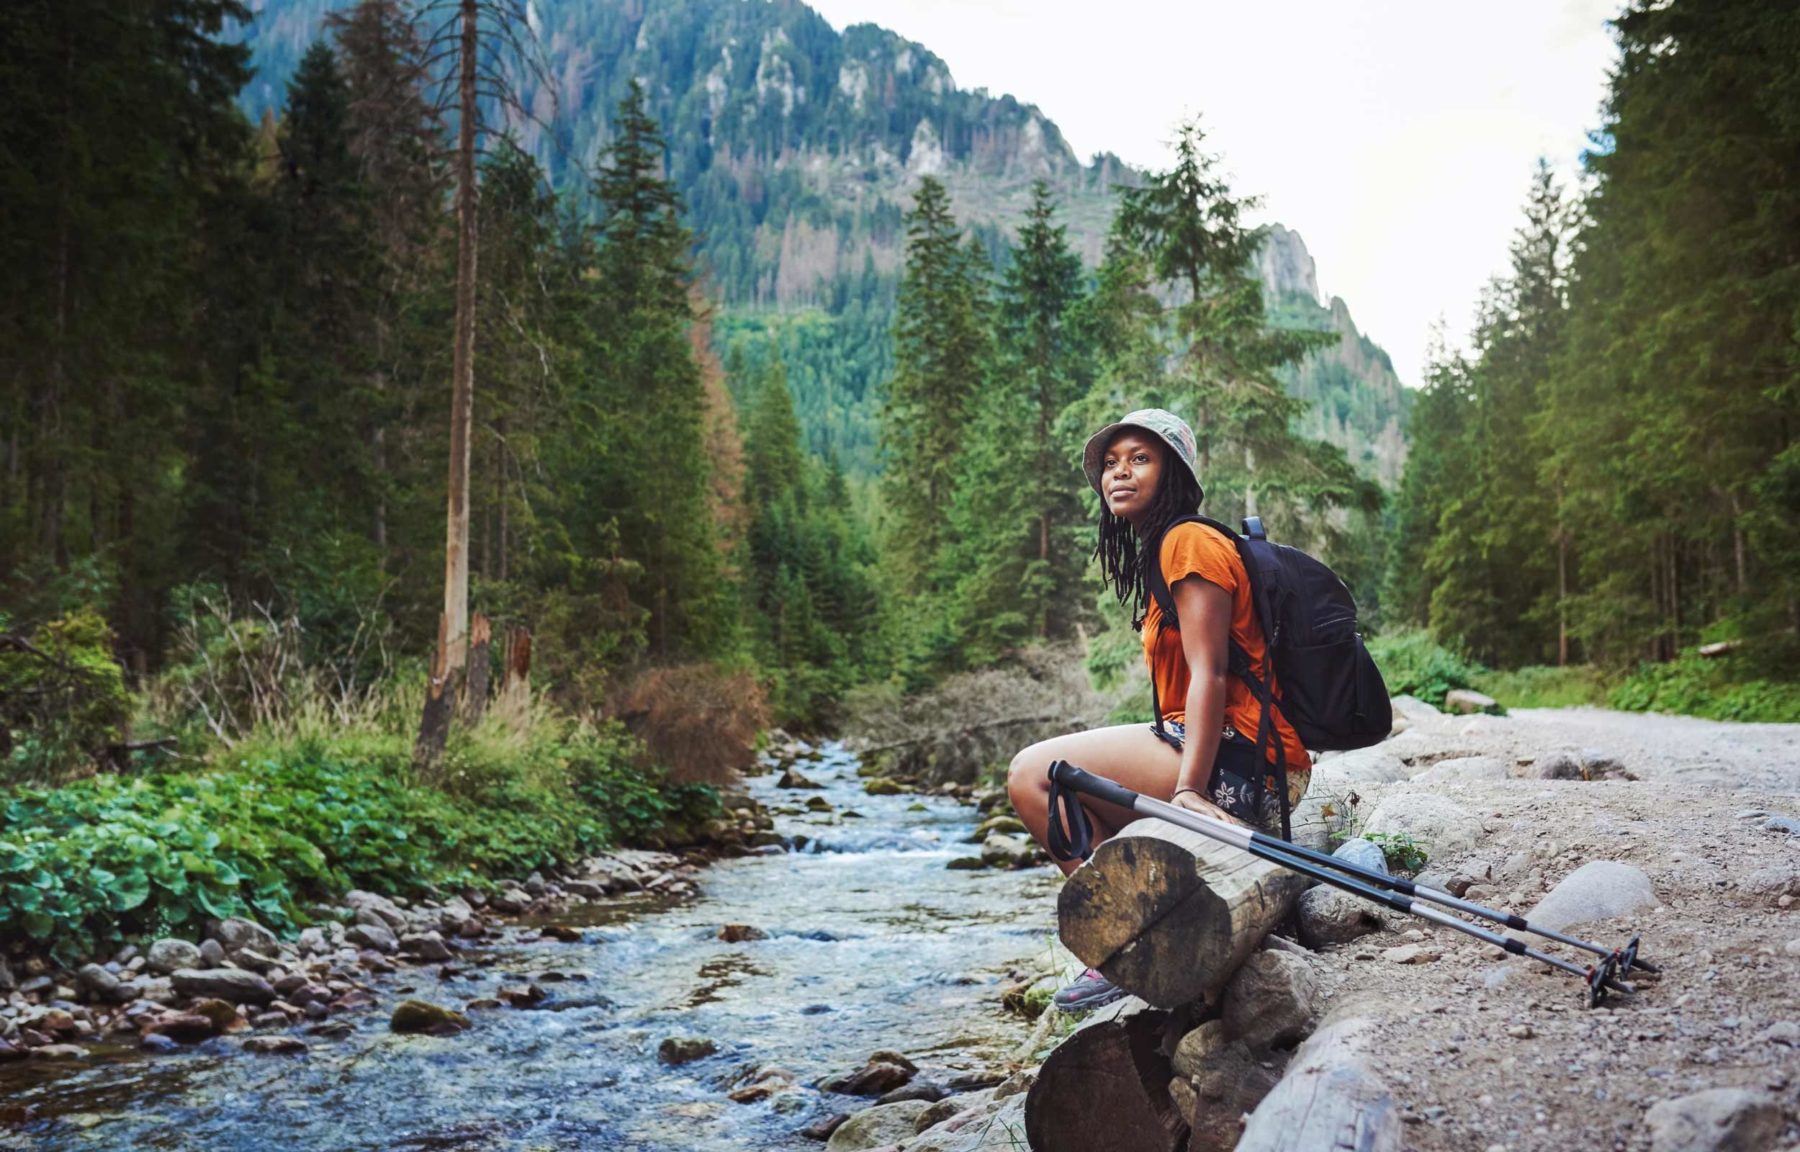 Young woman with hiking gear sits on log next to stream in forest valley